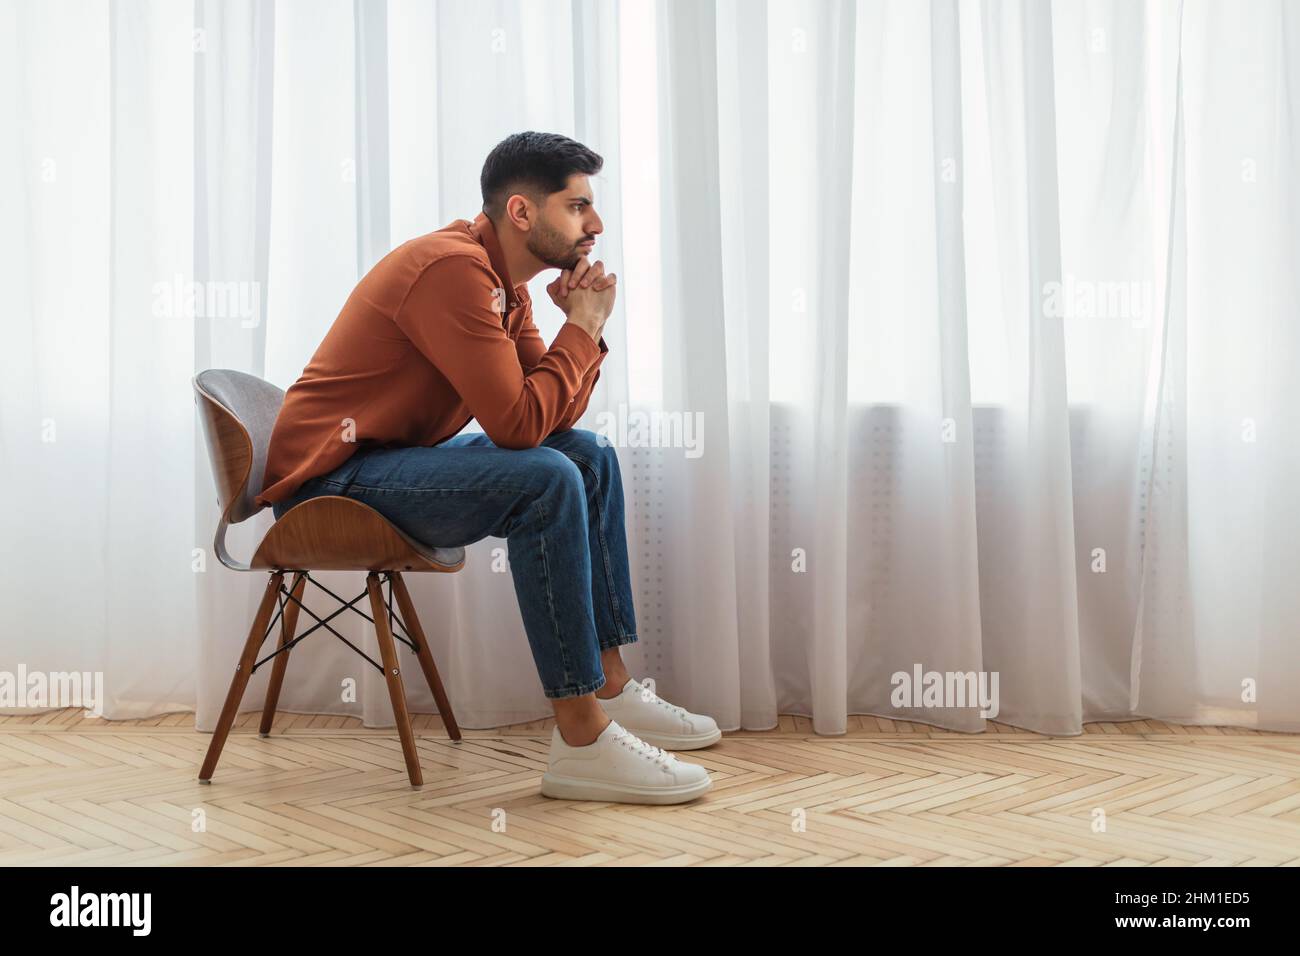 Pensive Arab man sitting on chair and thinking Stock Photo